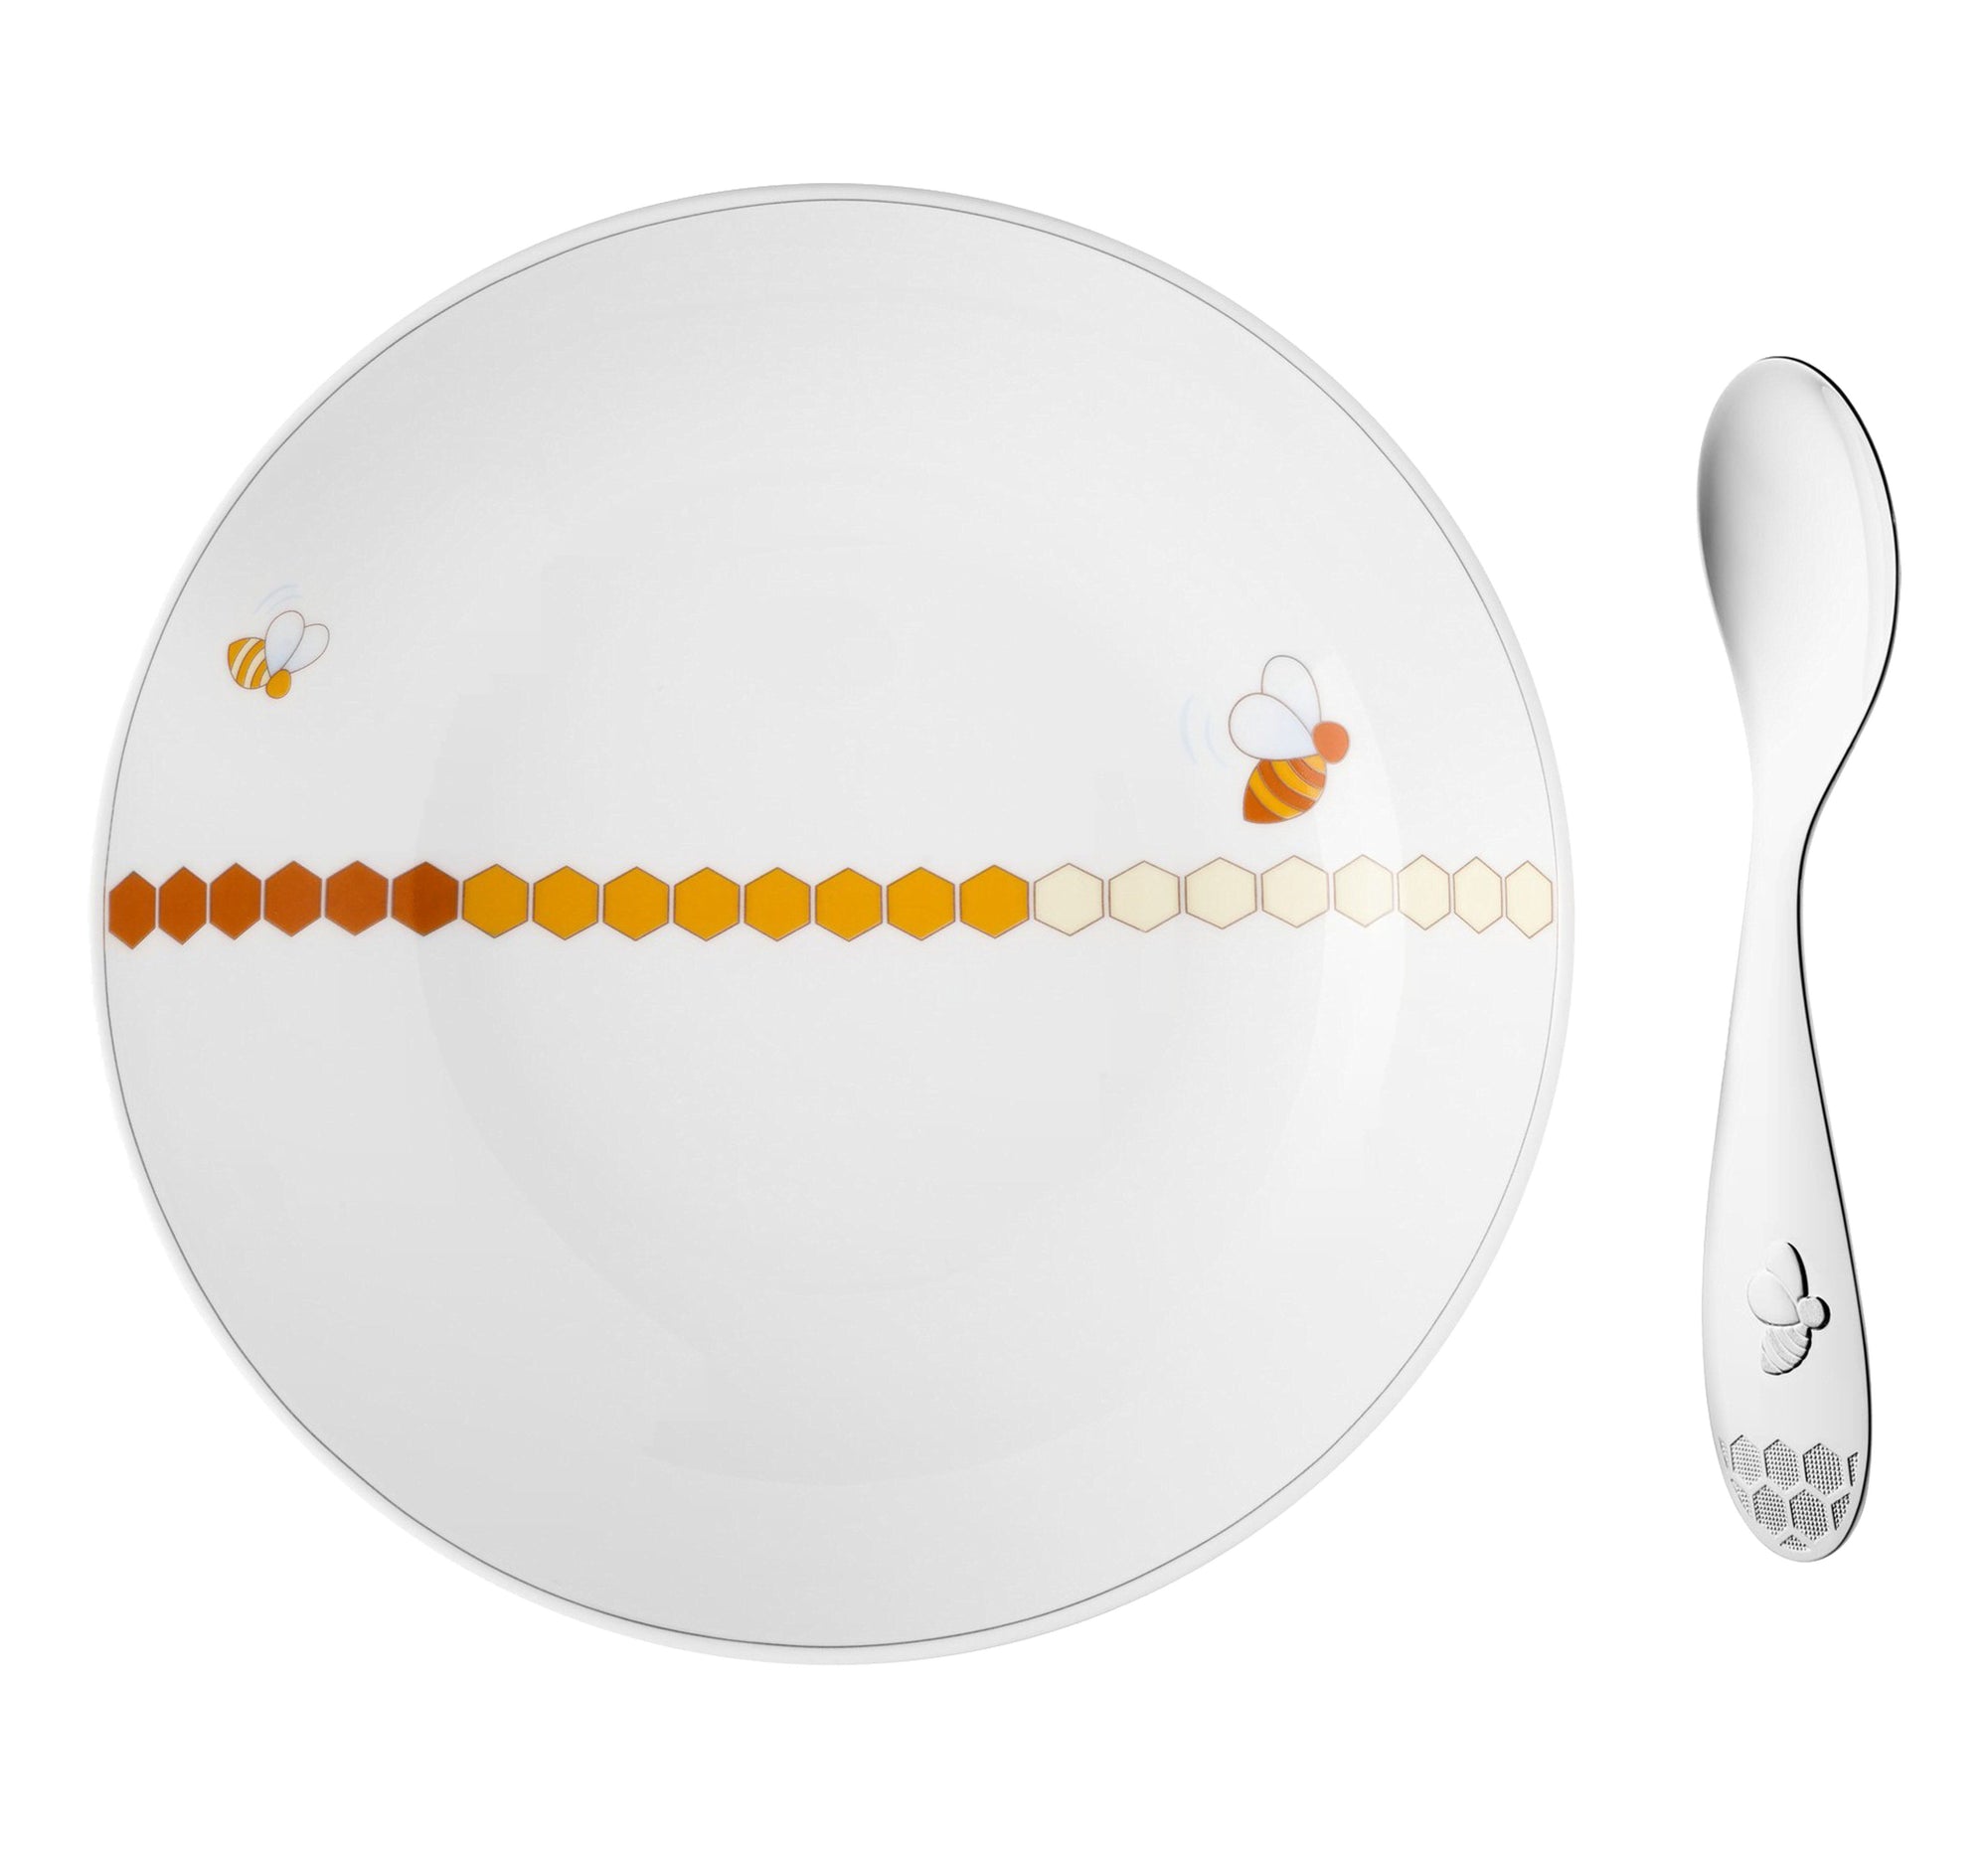 Christofle BeeBee Baby spoon and plate set